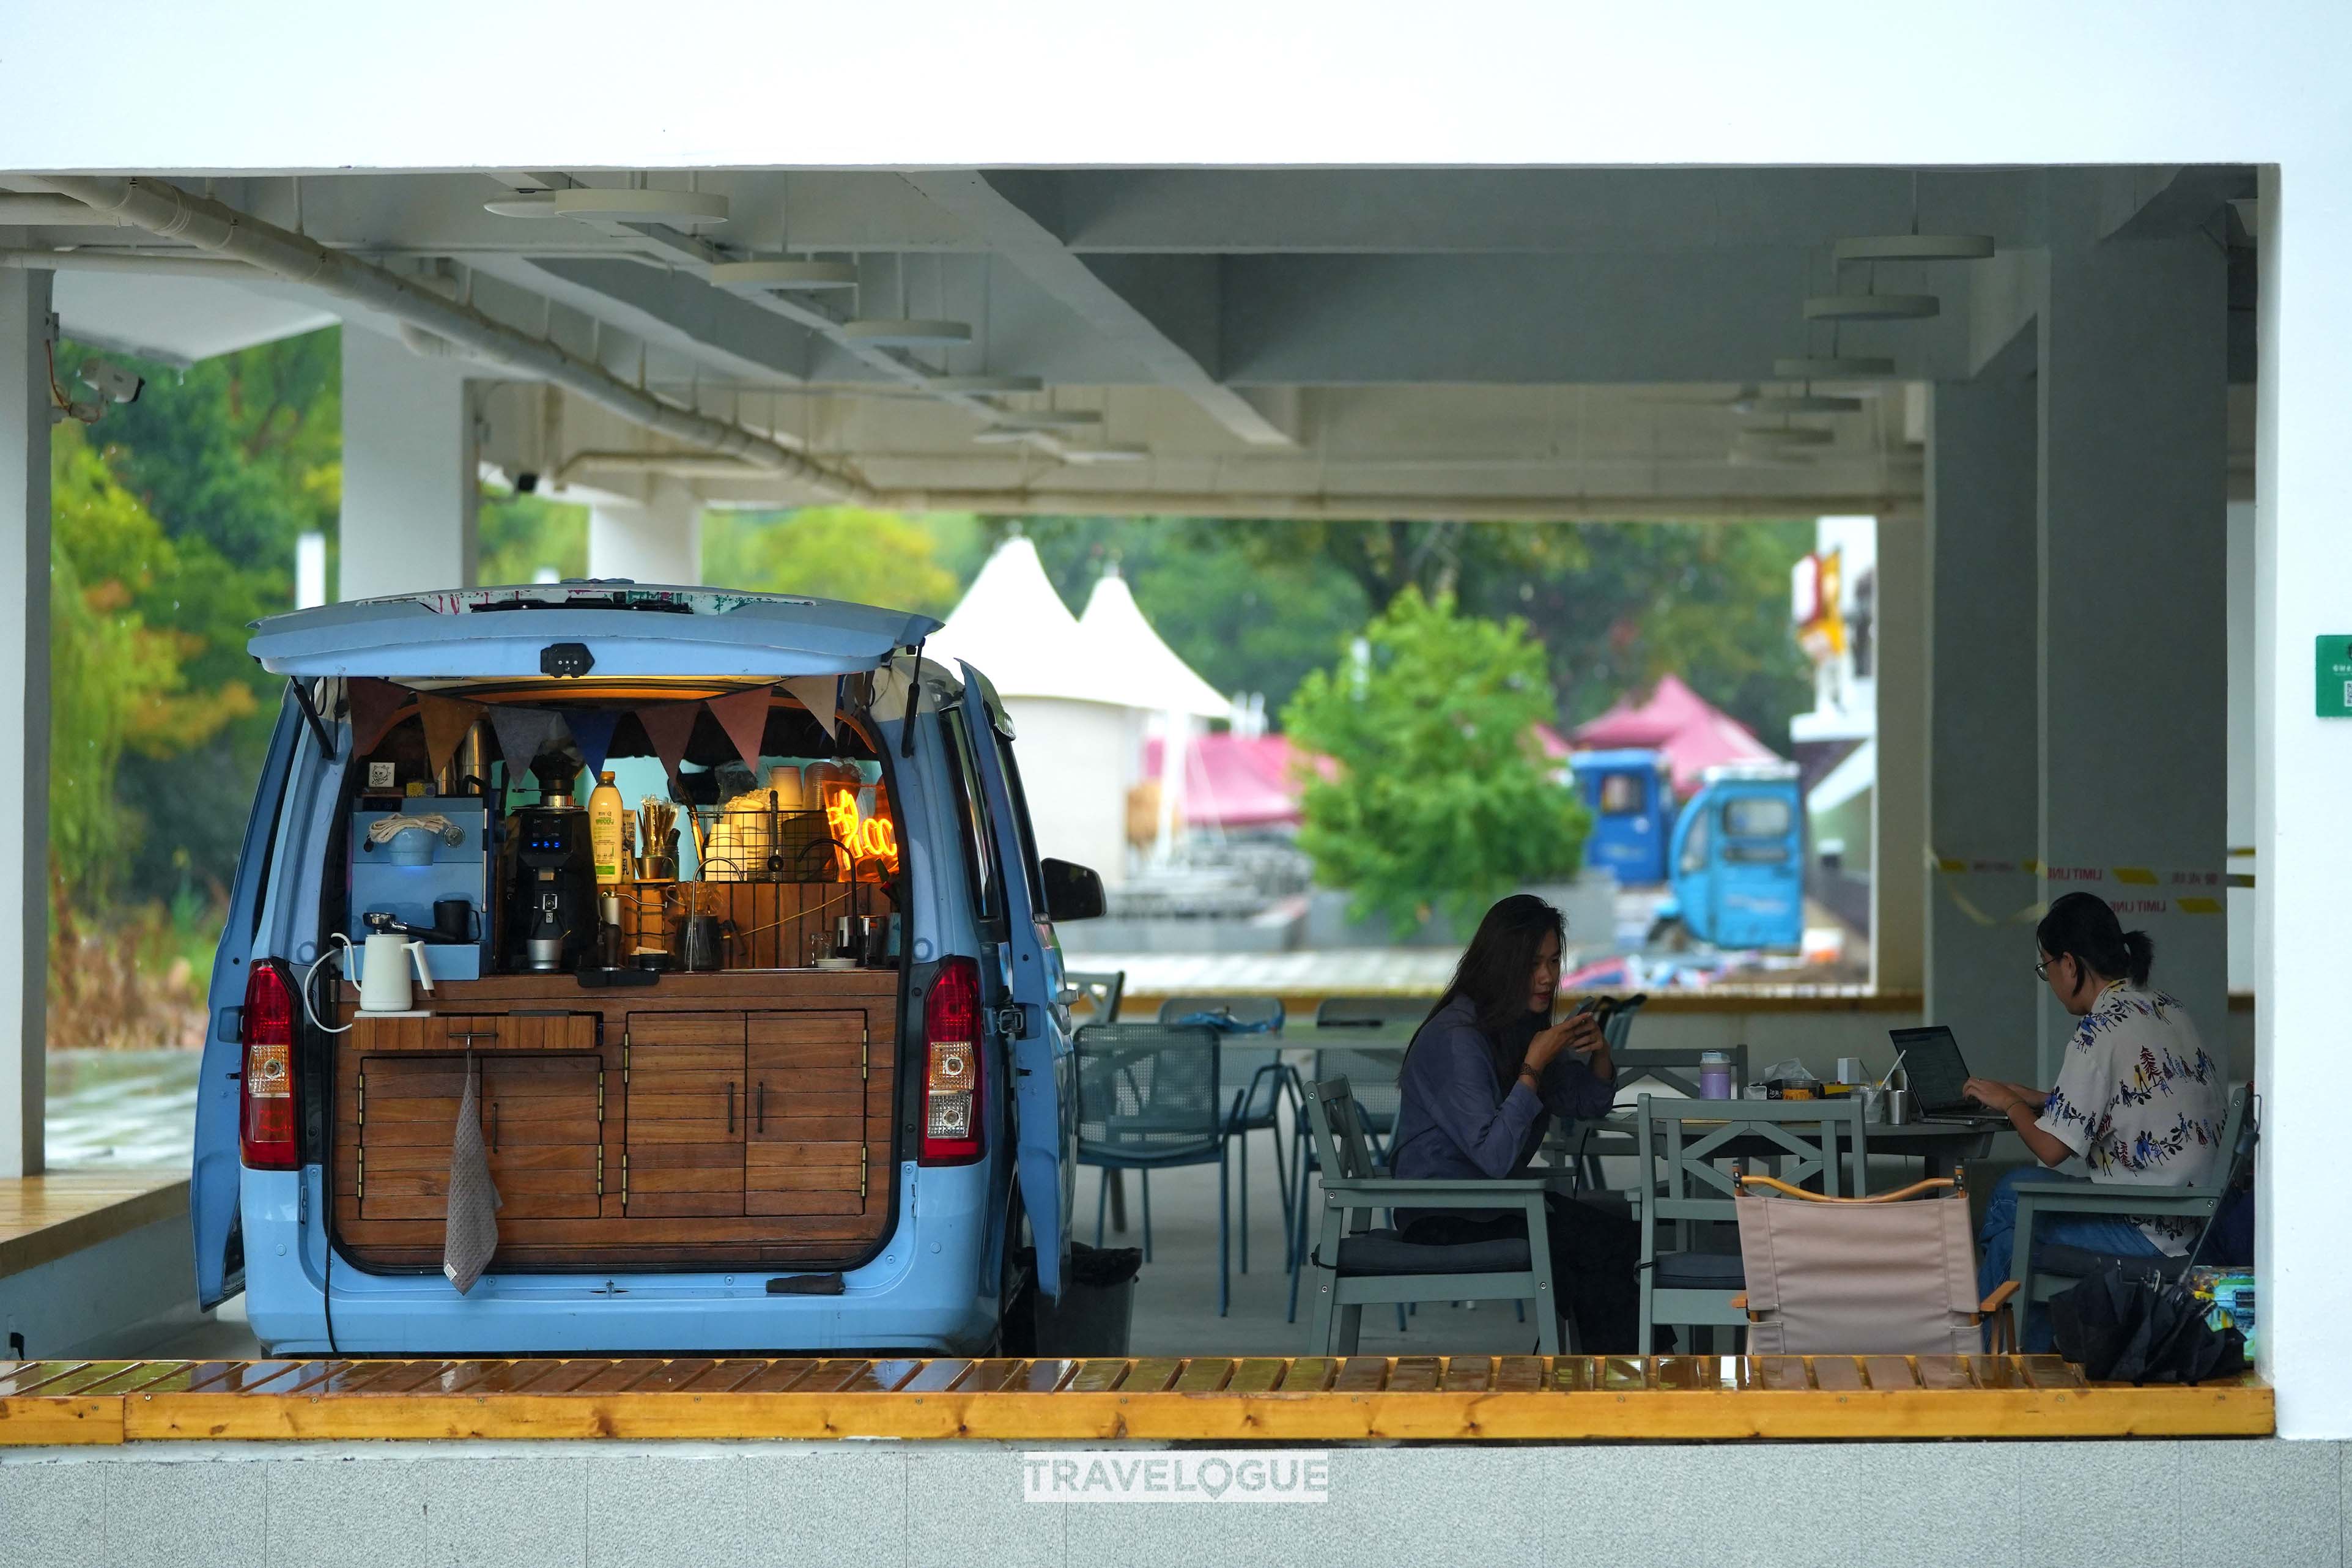 The image shows a van that doubles as a mobile coffee trailer, run by a digital nomad entrepreneur in Anji, Zhejiang Province. /CGTN